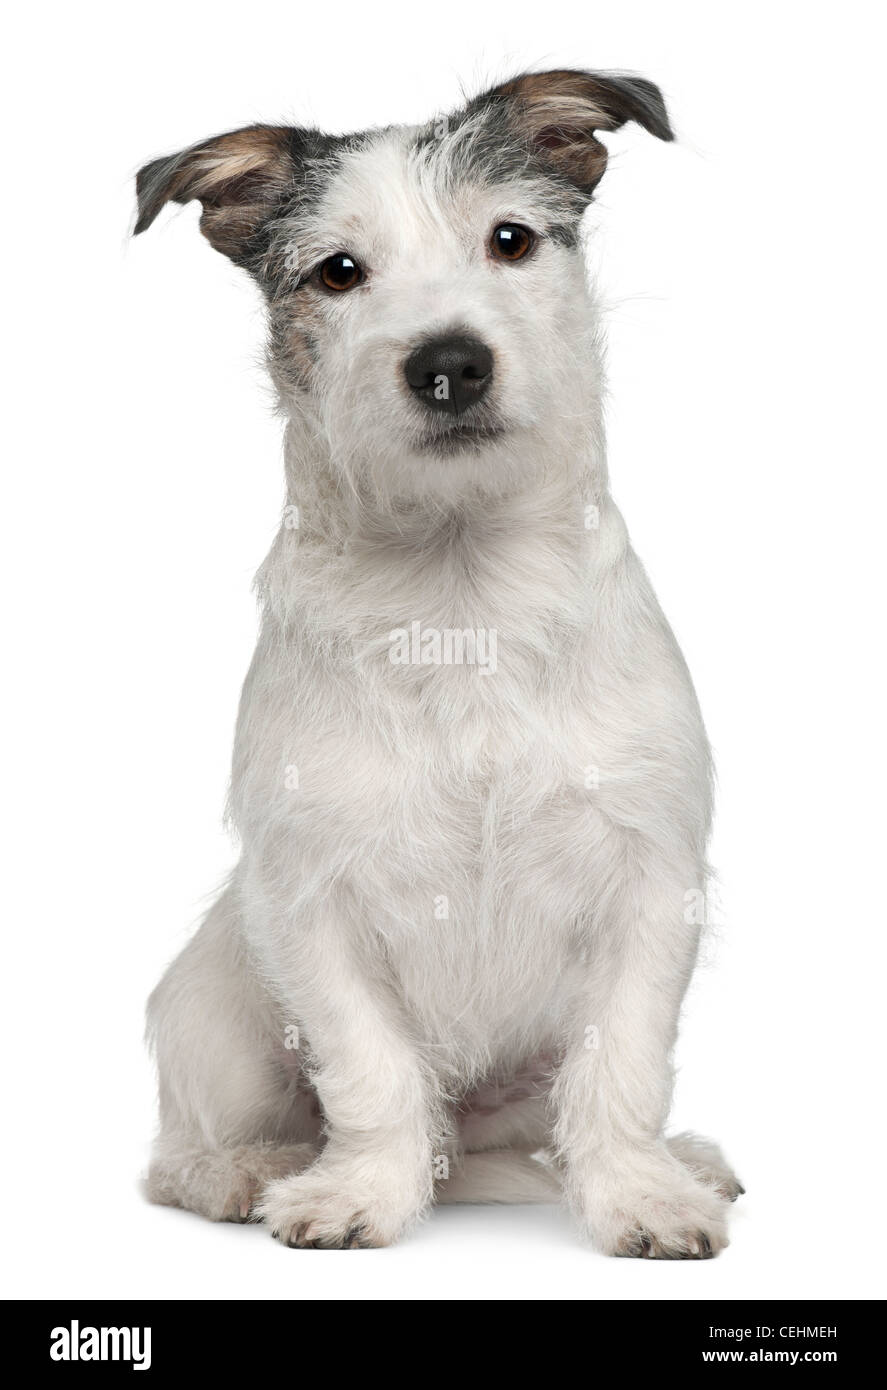 Mixed-breed, 7 months old, sitting in front of white background Stock Photo